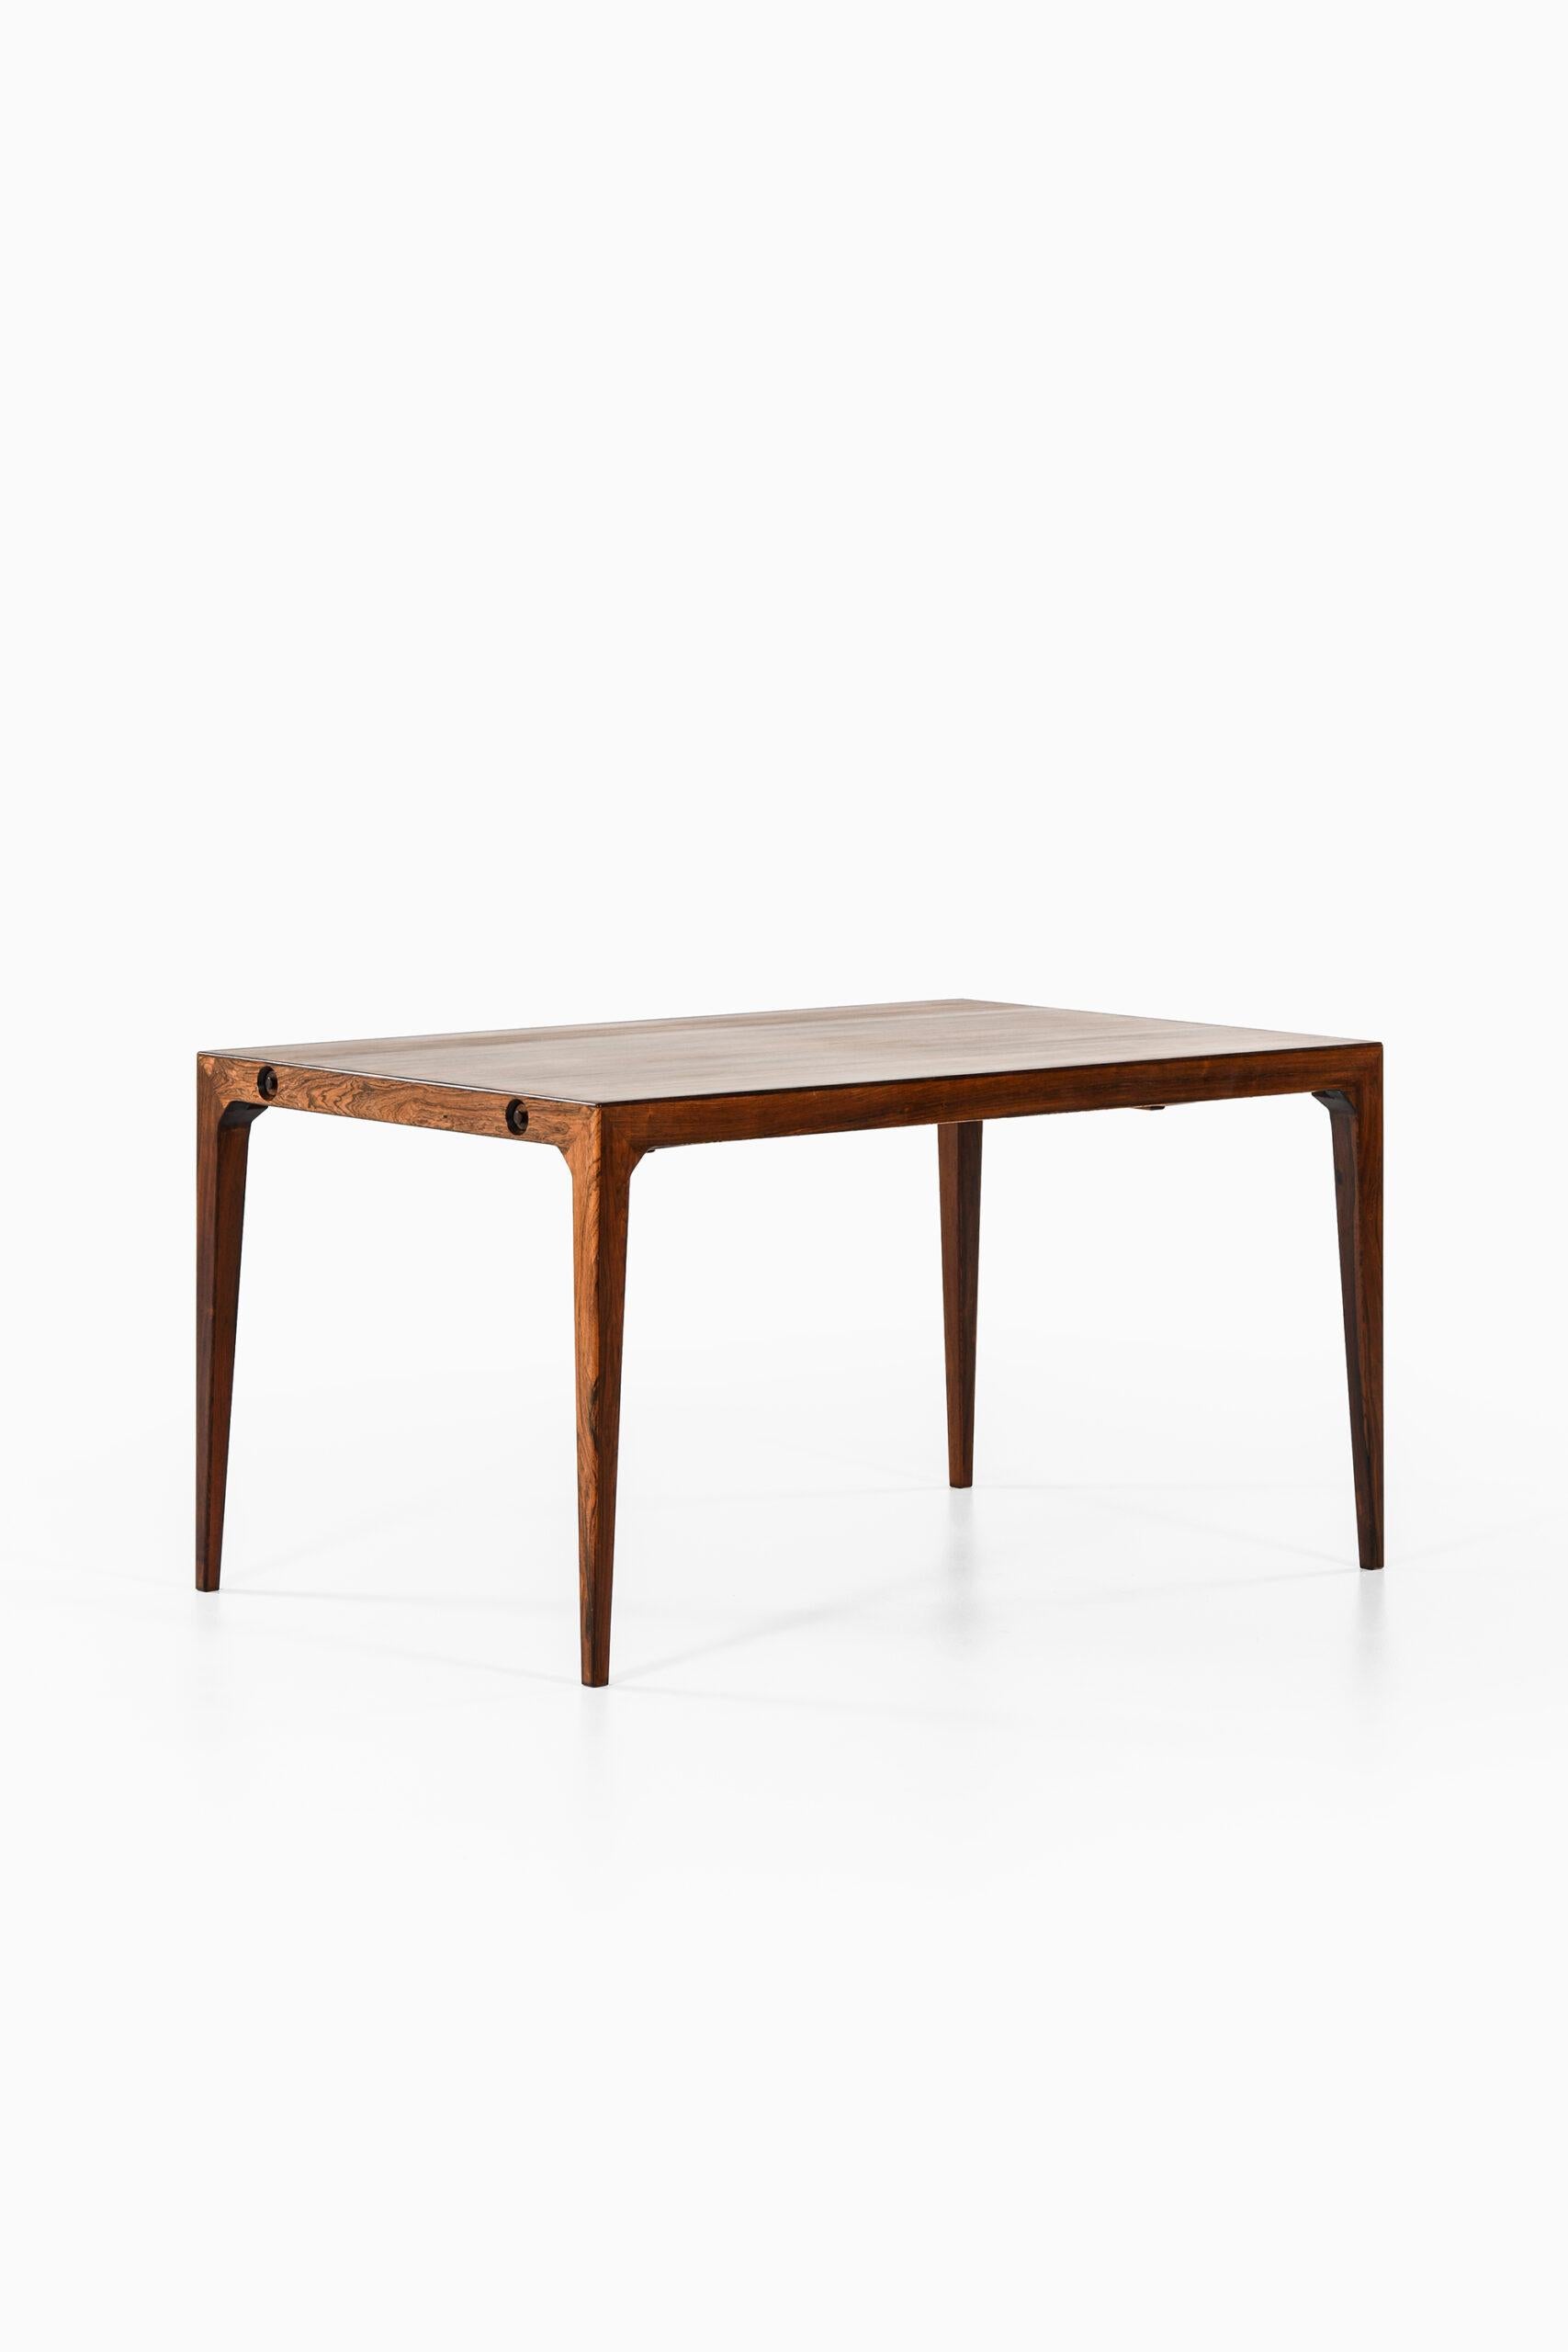 Mid-20th Century Poul Hundevad & Kai Winding Dining- / Work Table Produced by Poul Hundevad & Co For Sale